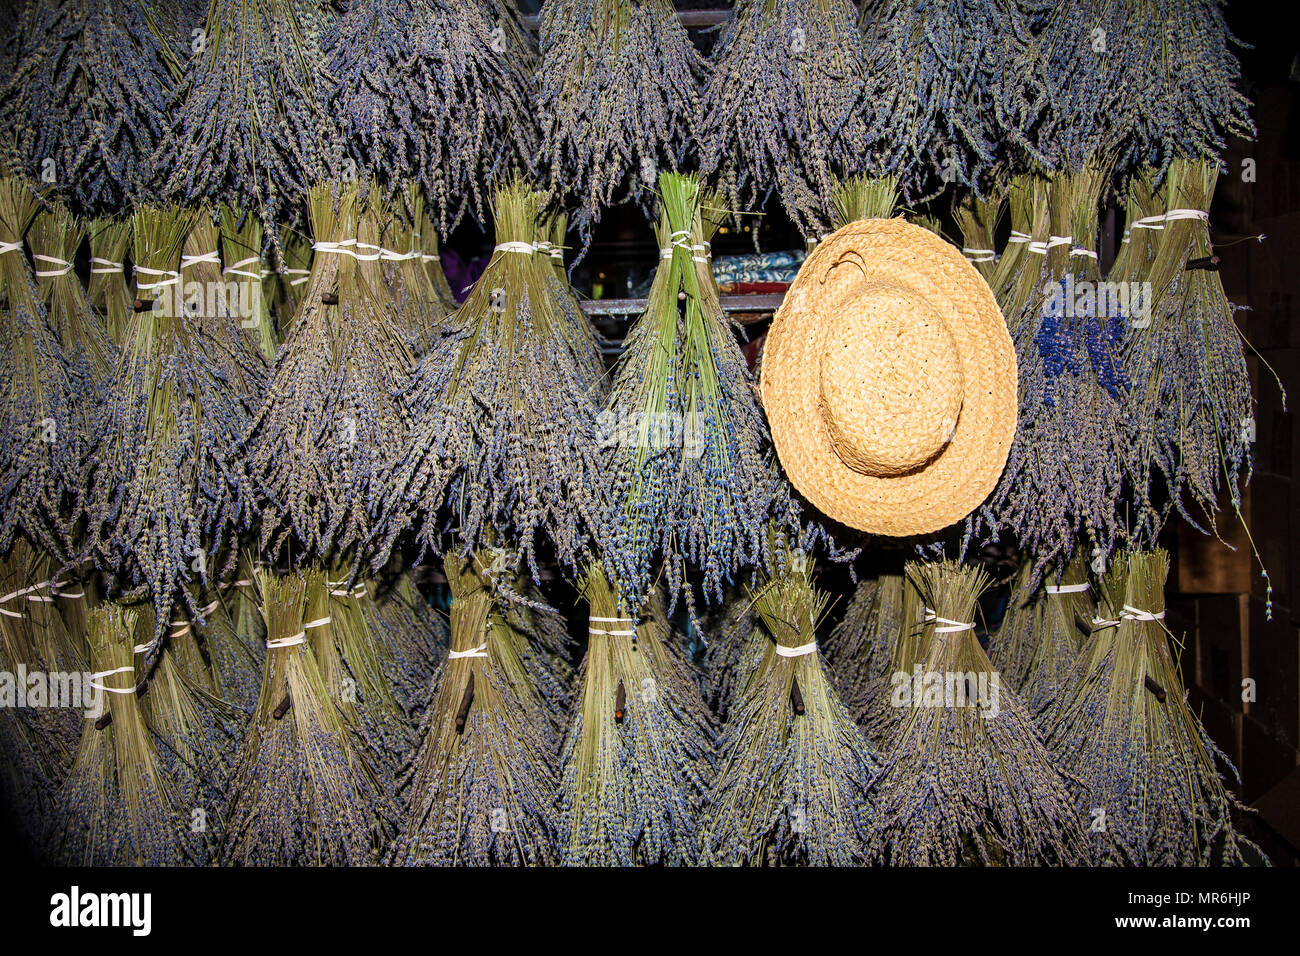 Vintage Lavender flowers drying on a rack and a straw hat, New Jersey, USA, commercial flowers botanicals herb still life herbs unconventional Stock Photo